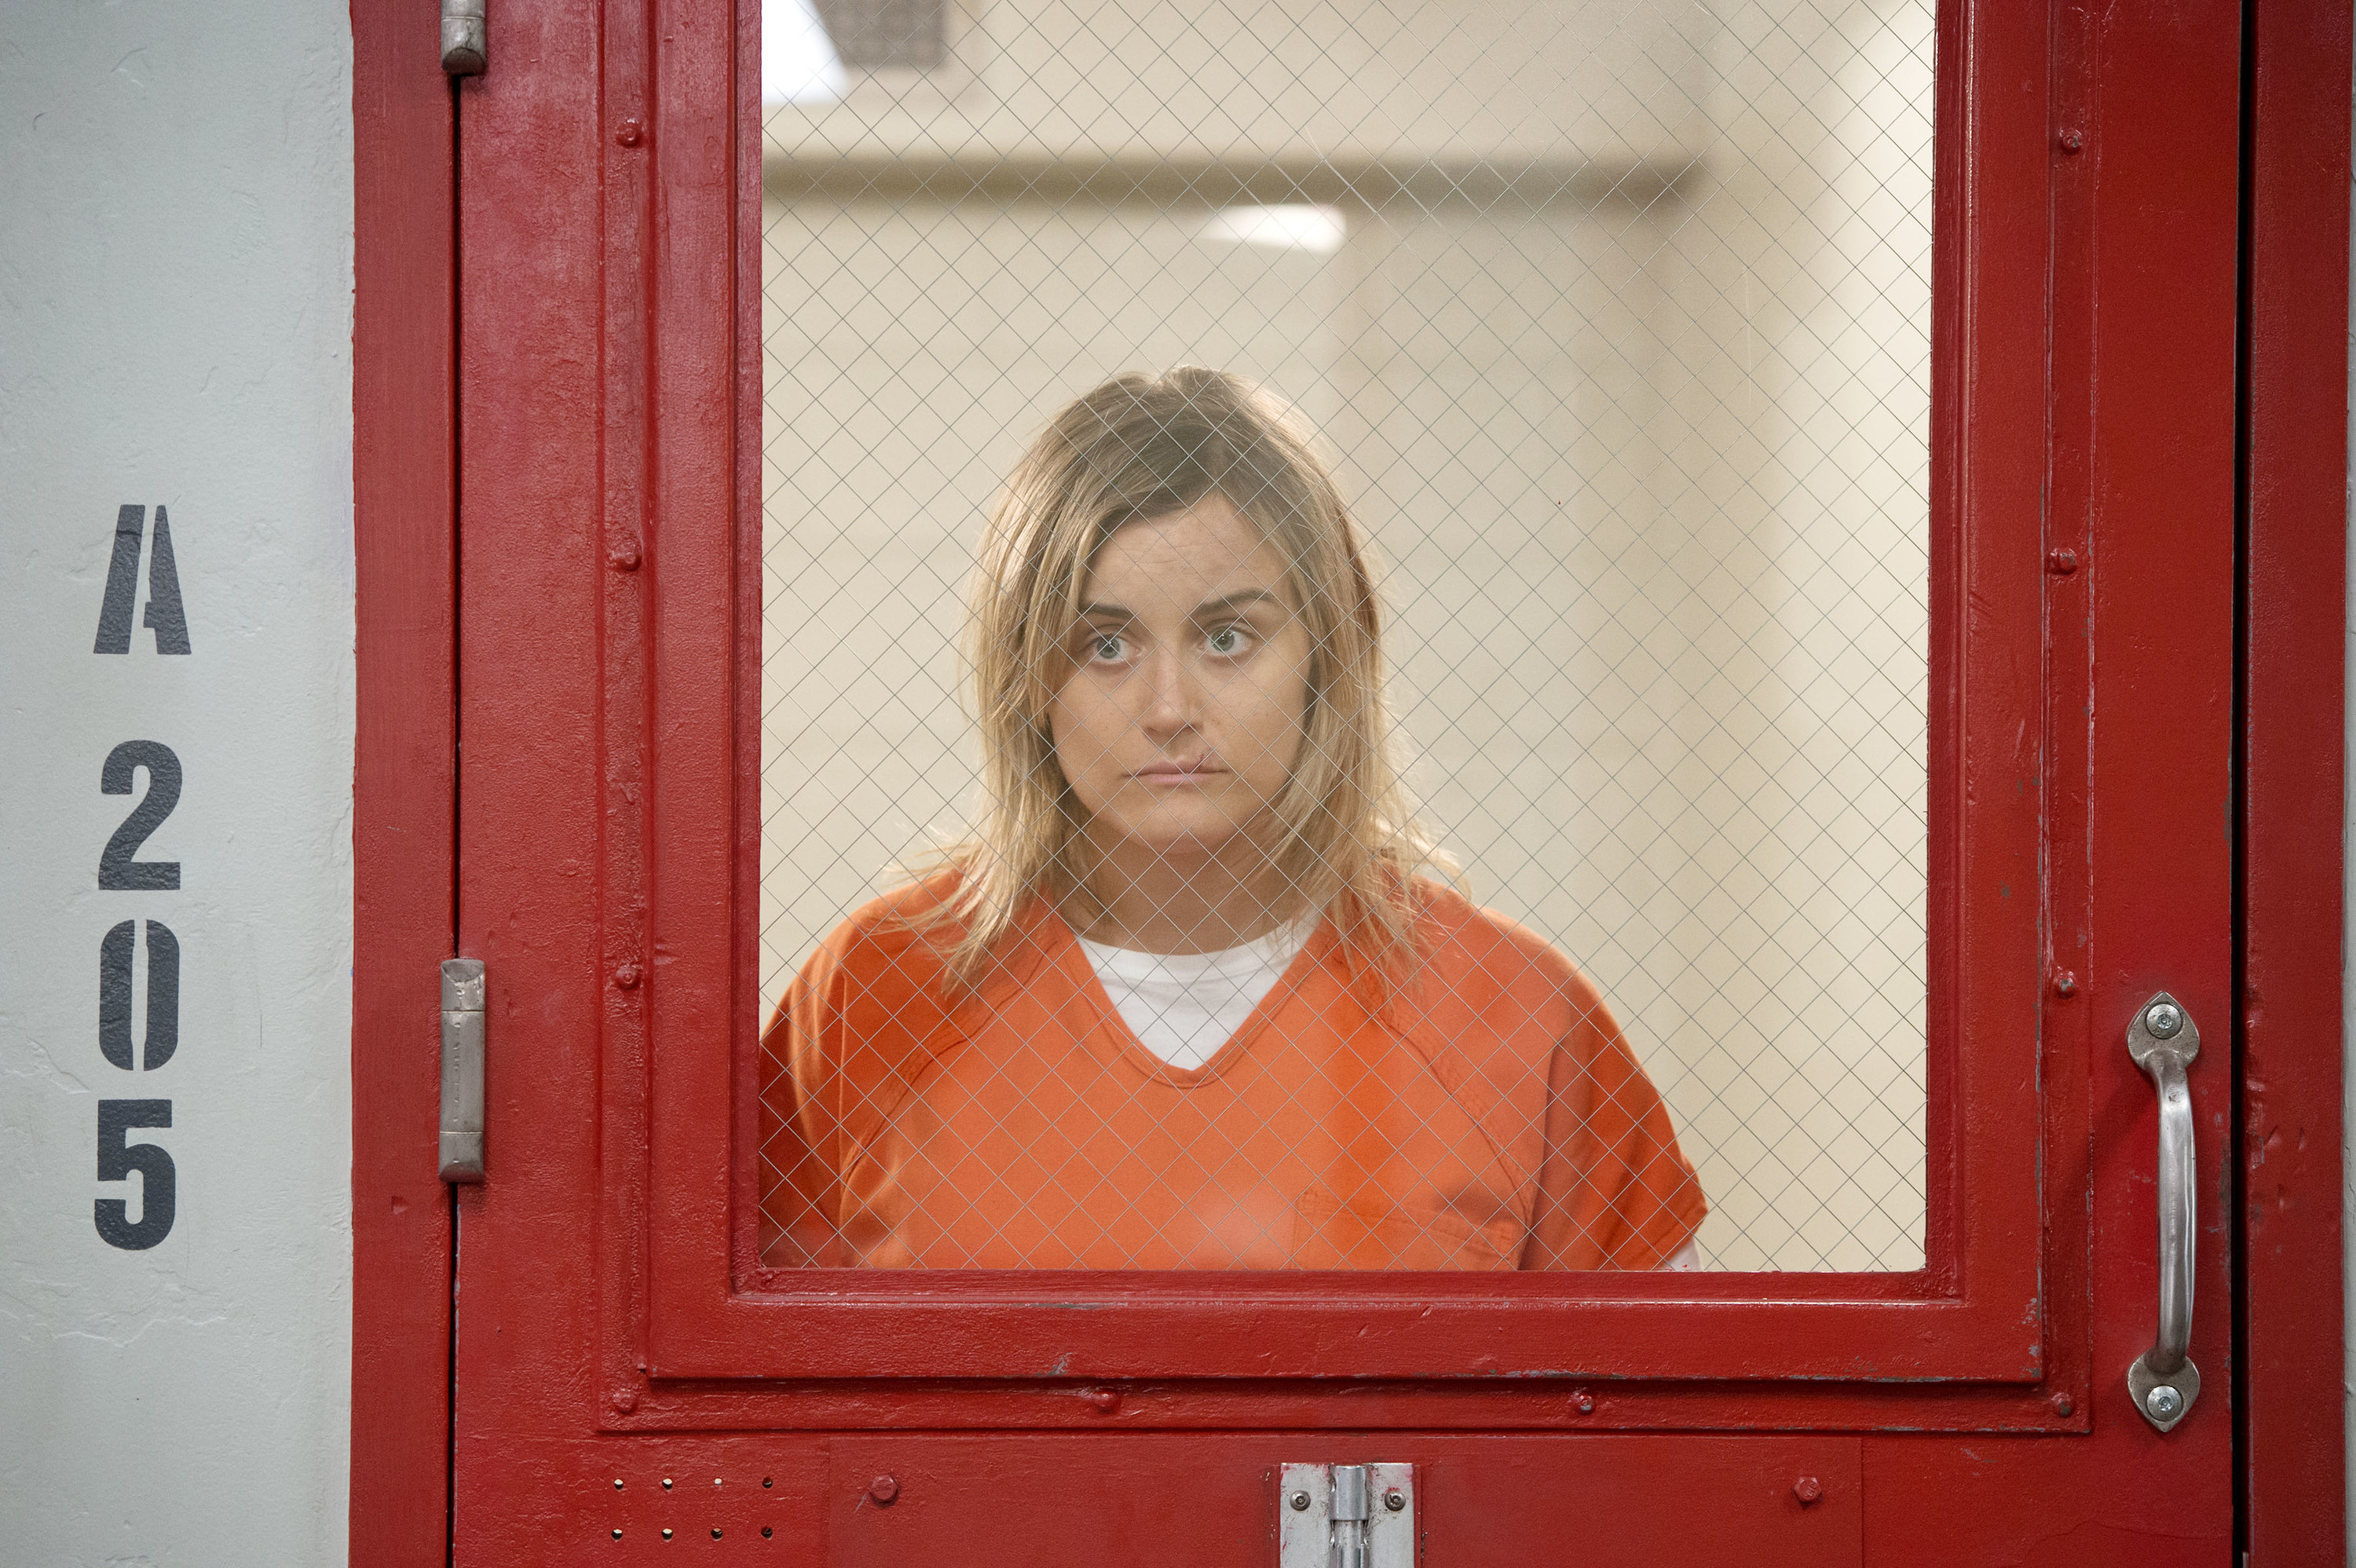 Taylor Schilling looking through the glass of a jail door